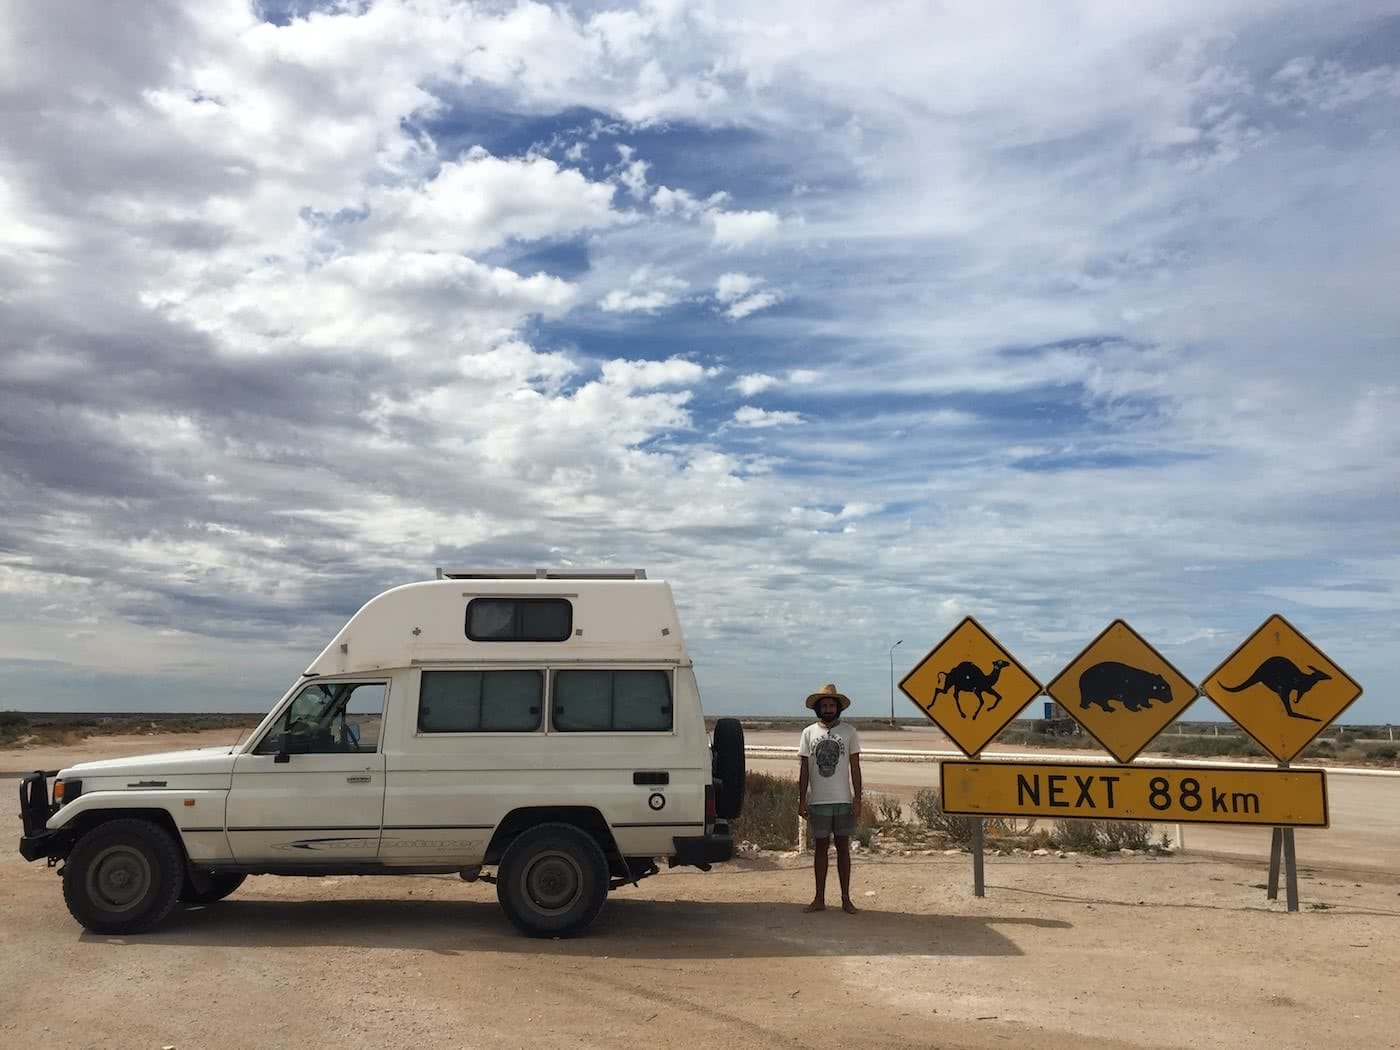 Troopy Travels // Chasing Sunsets From Byron Bay To The Ningaloo Reef, Alice Forrest, Nullarbor Road, SA, signs, van, Kangaroo, outback, camel, wombat, wildlife, road trip